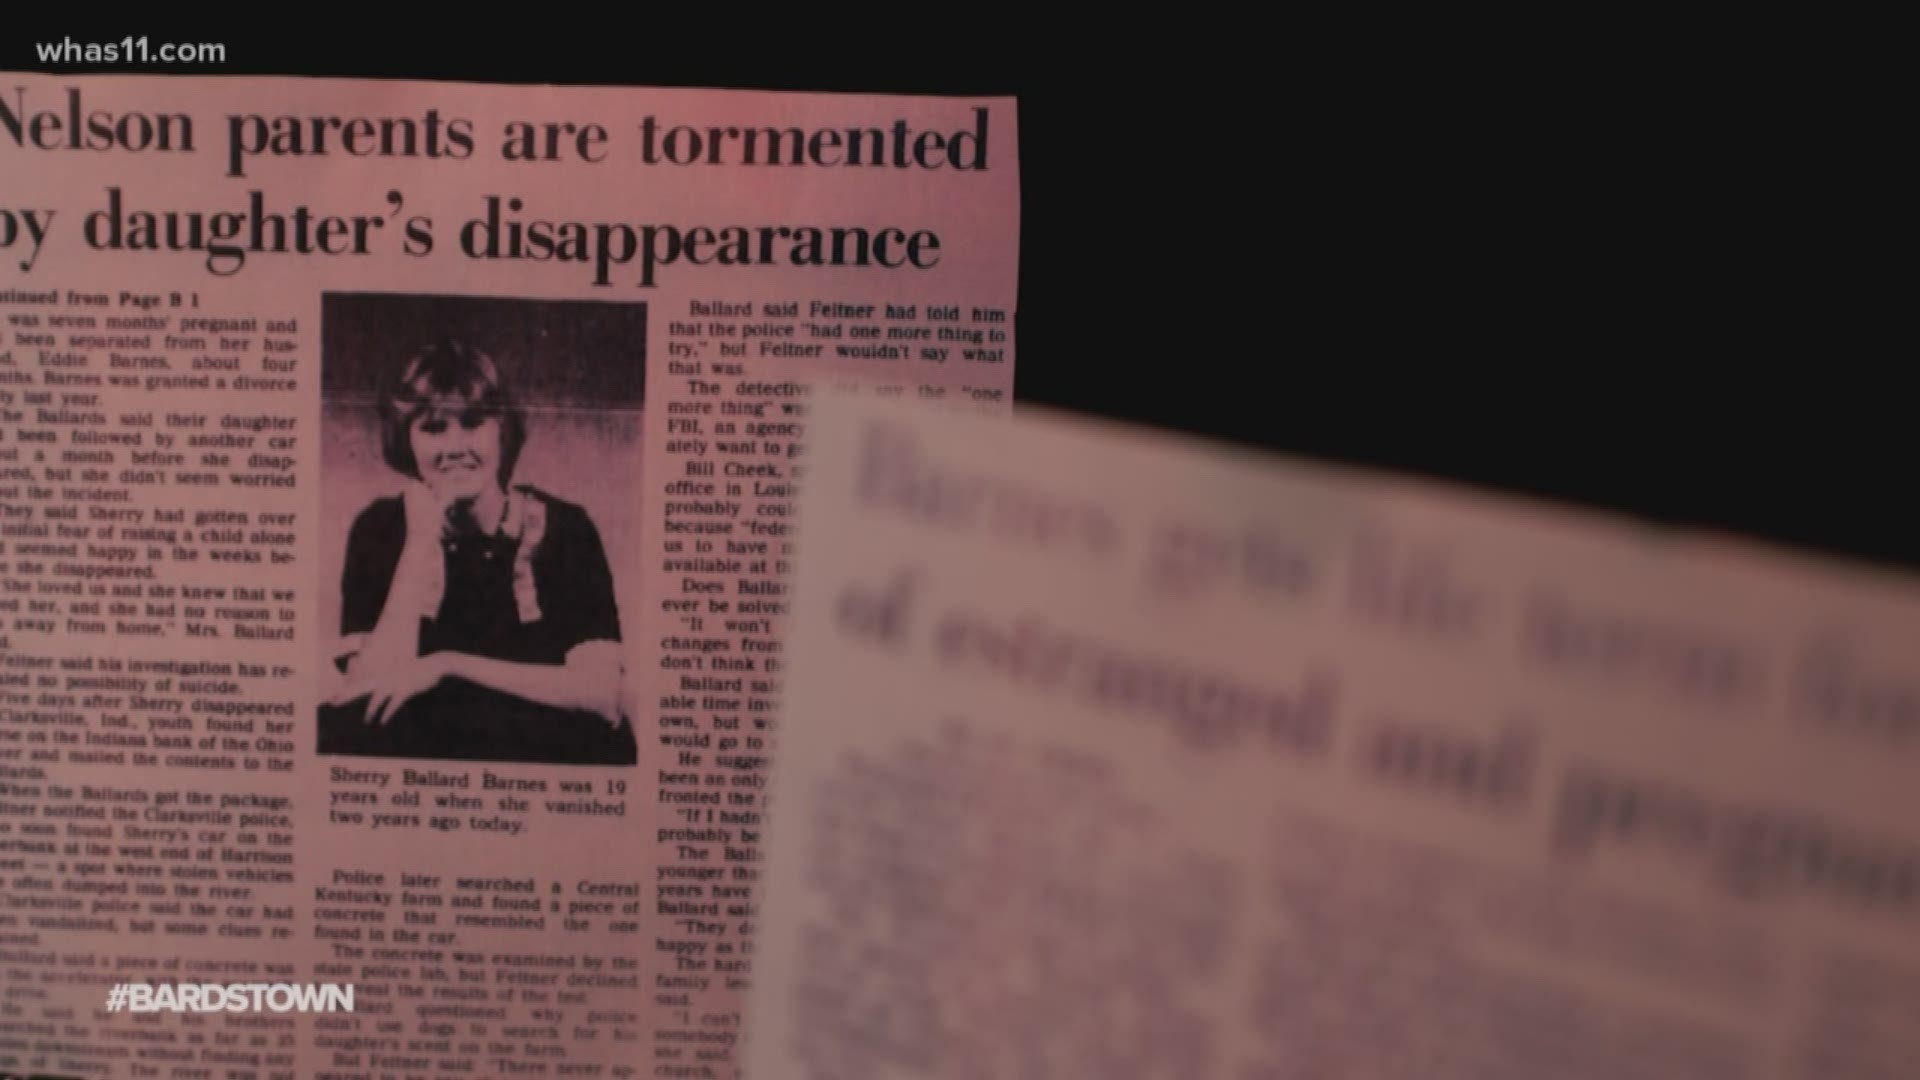 Forty years ago, before Crystal Rogers and Tommy Ballard's cases, Sherry Ballard Barnes was murdered.